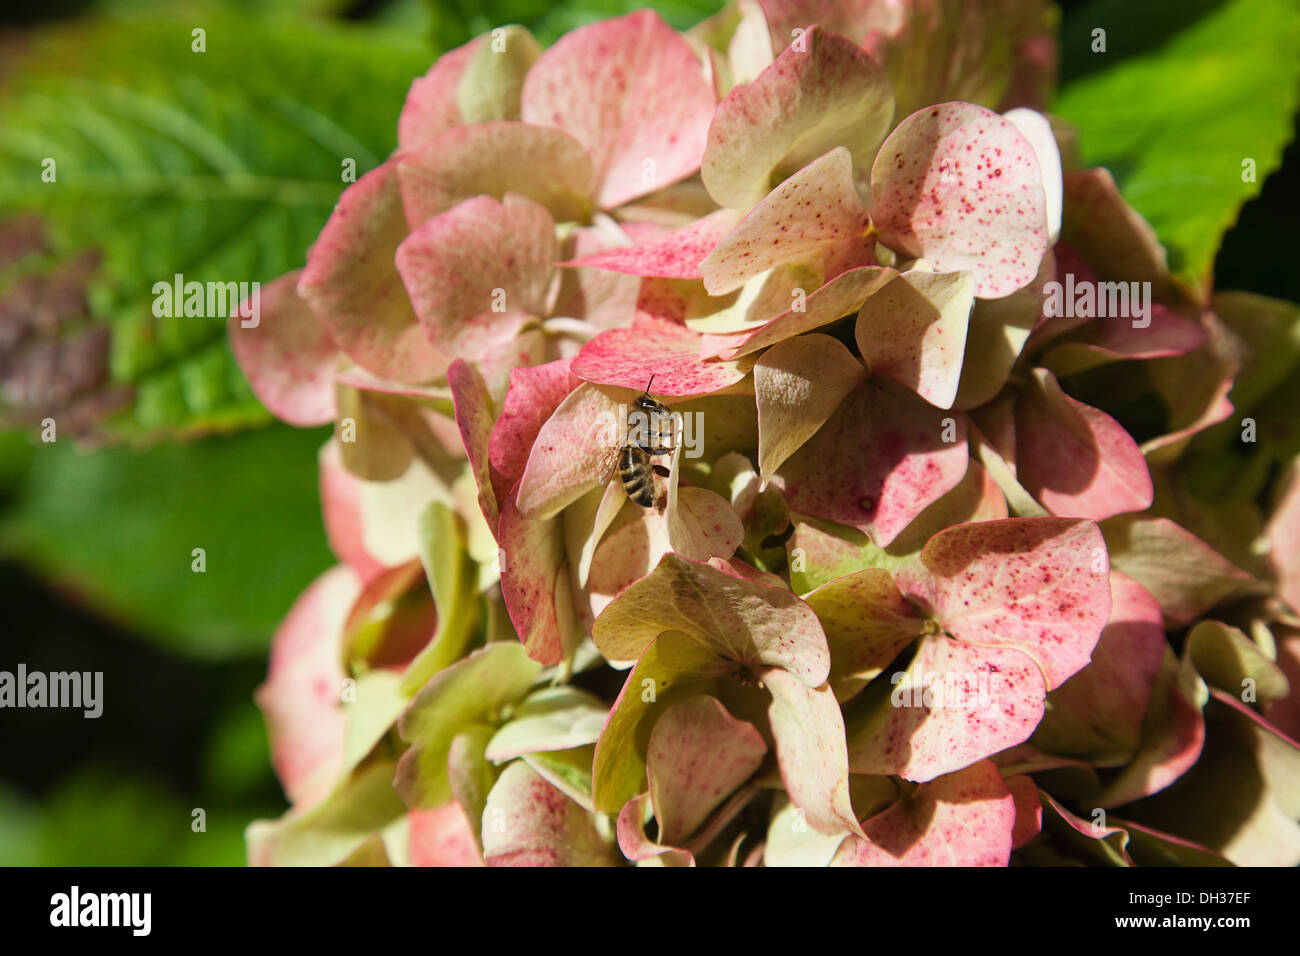 Hydrangea. Bee on cream and pink freckled Hydrangea flowers. Stock Photo